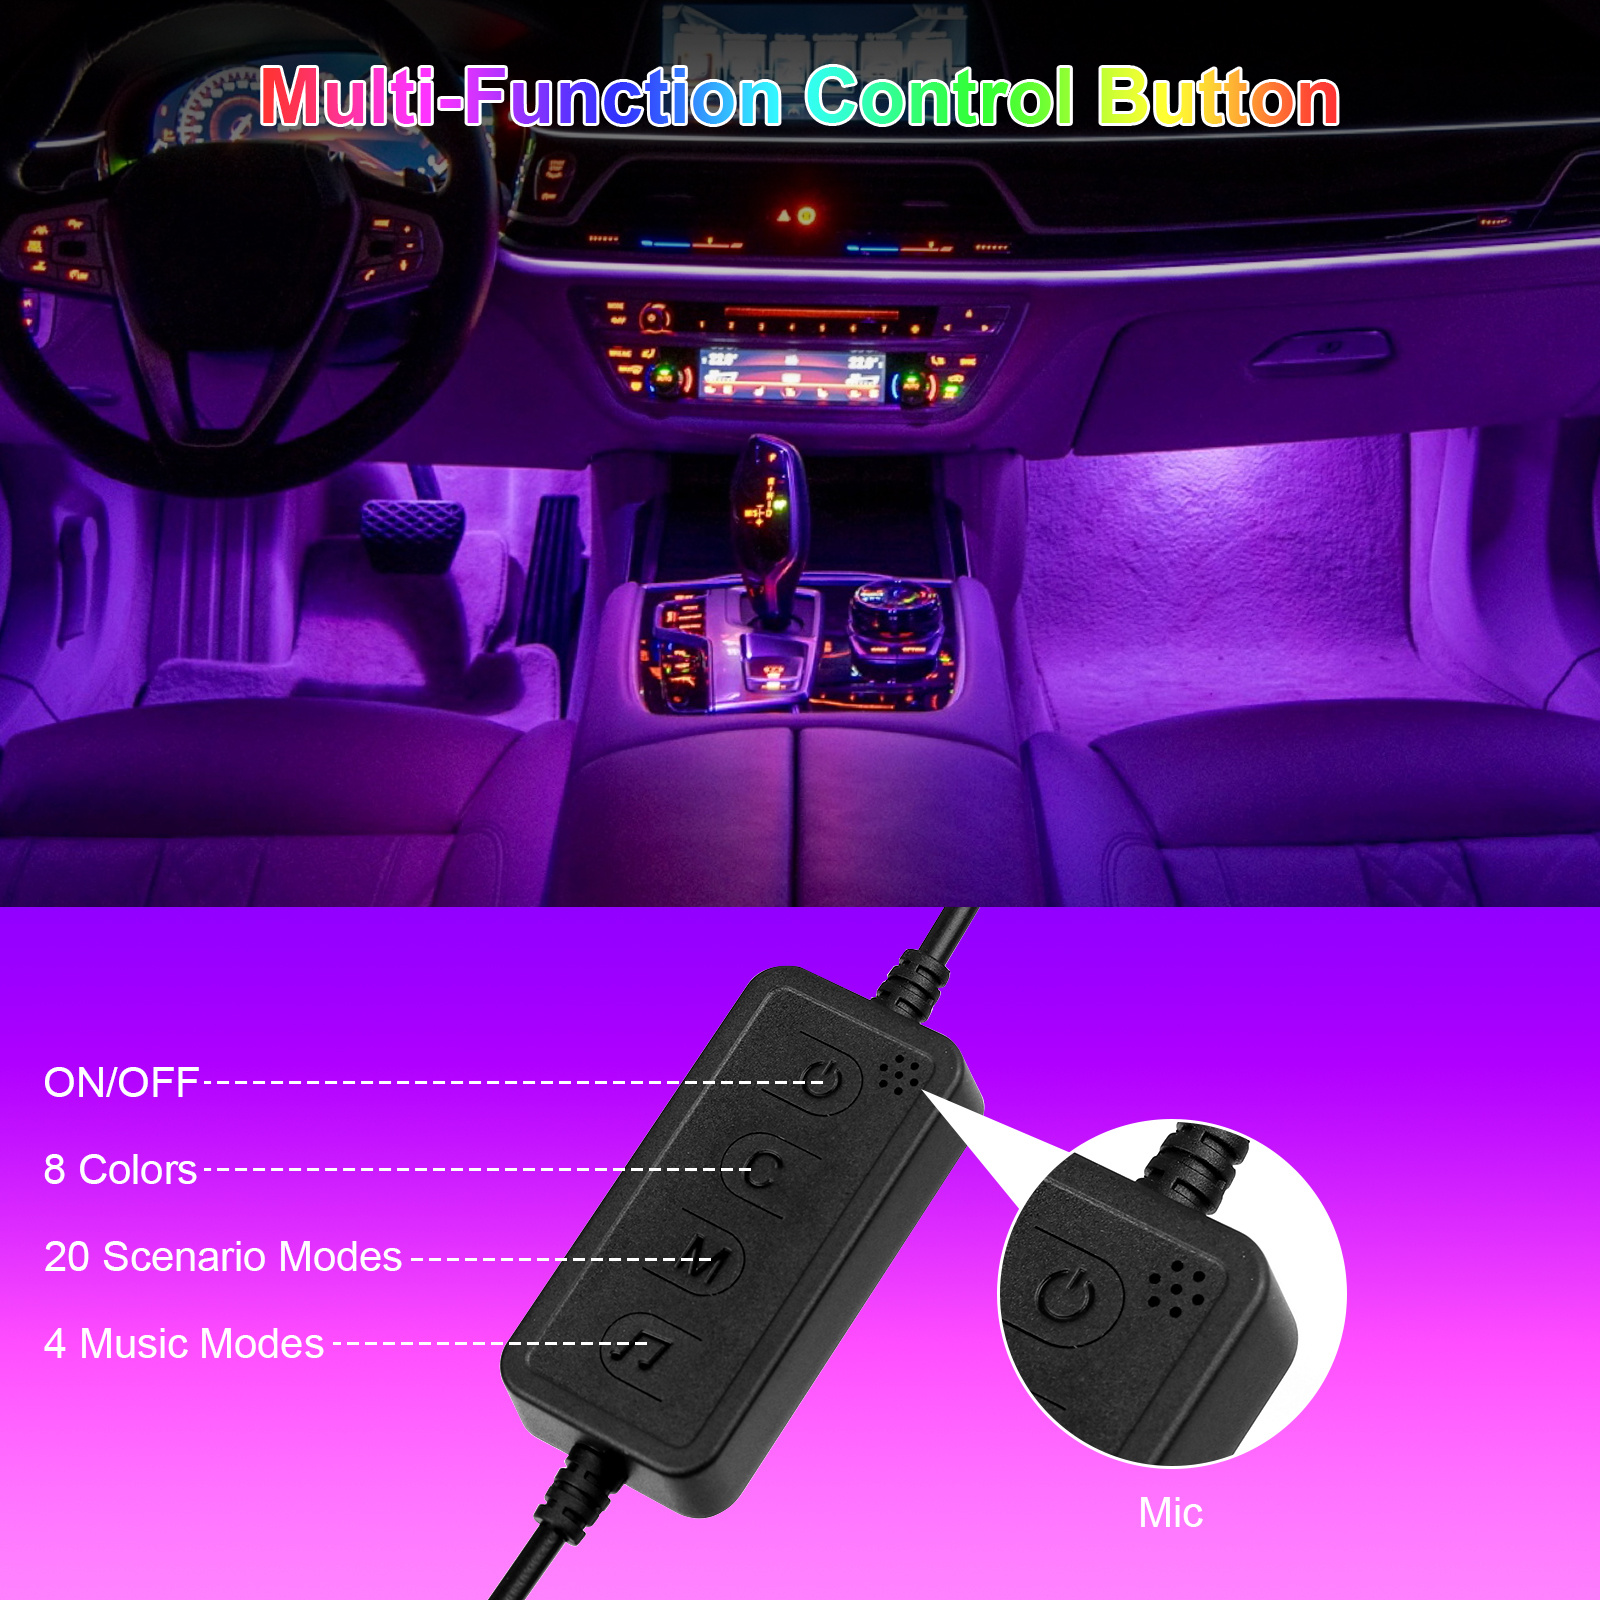 Upgrade Your Car's Interior with RGB App-Controlled Atmosphere Lights!